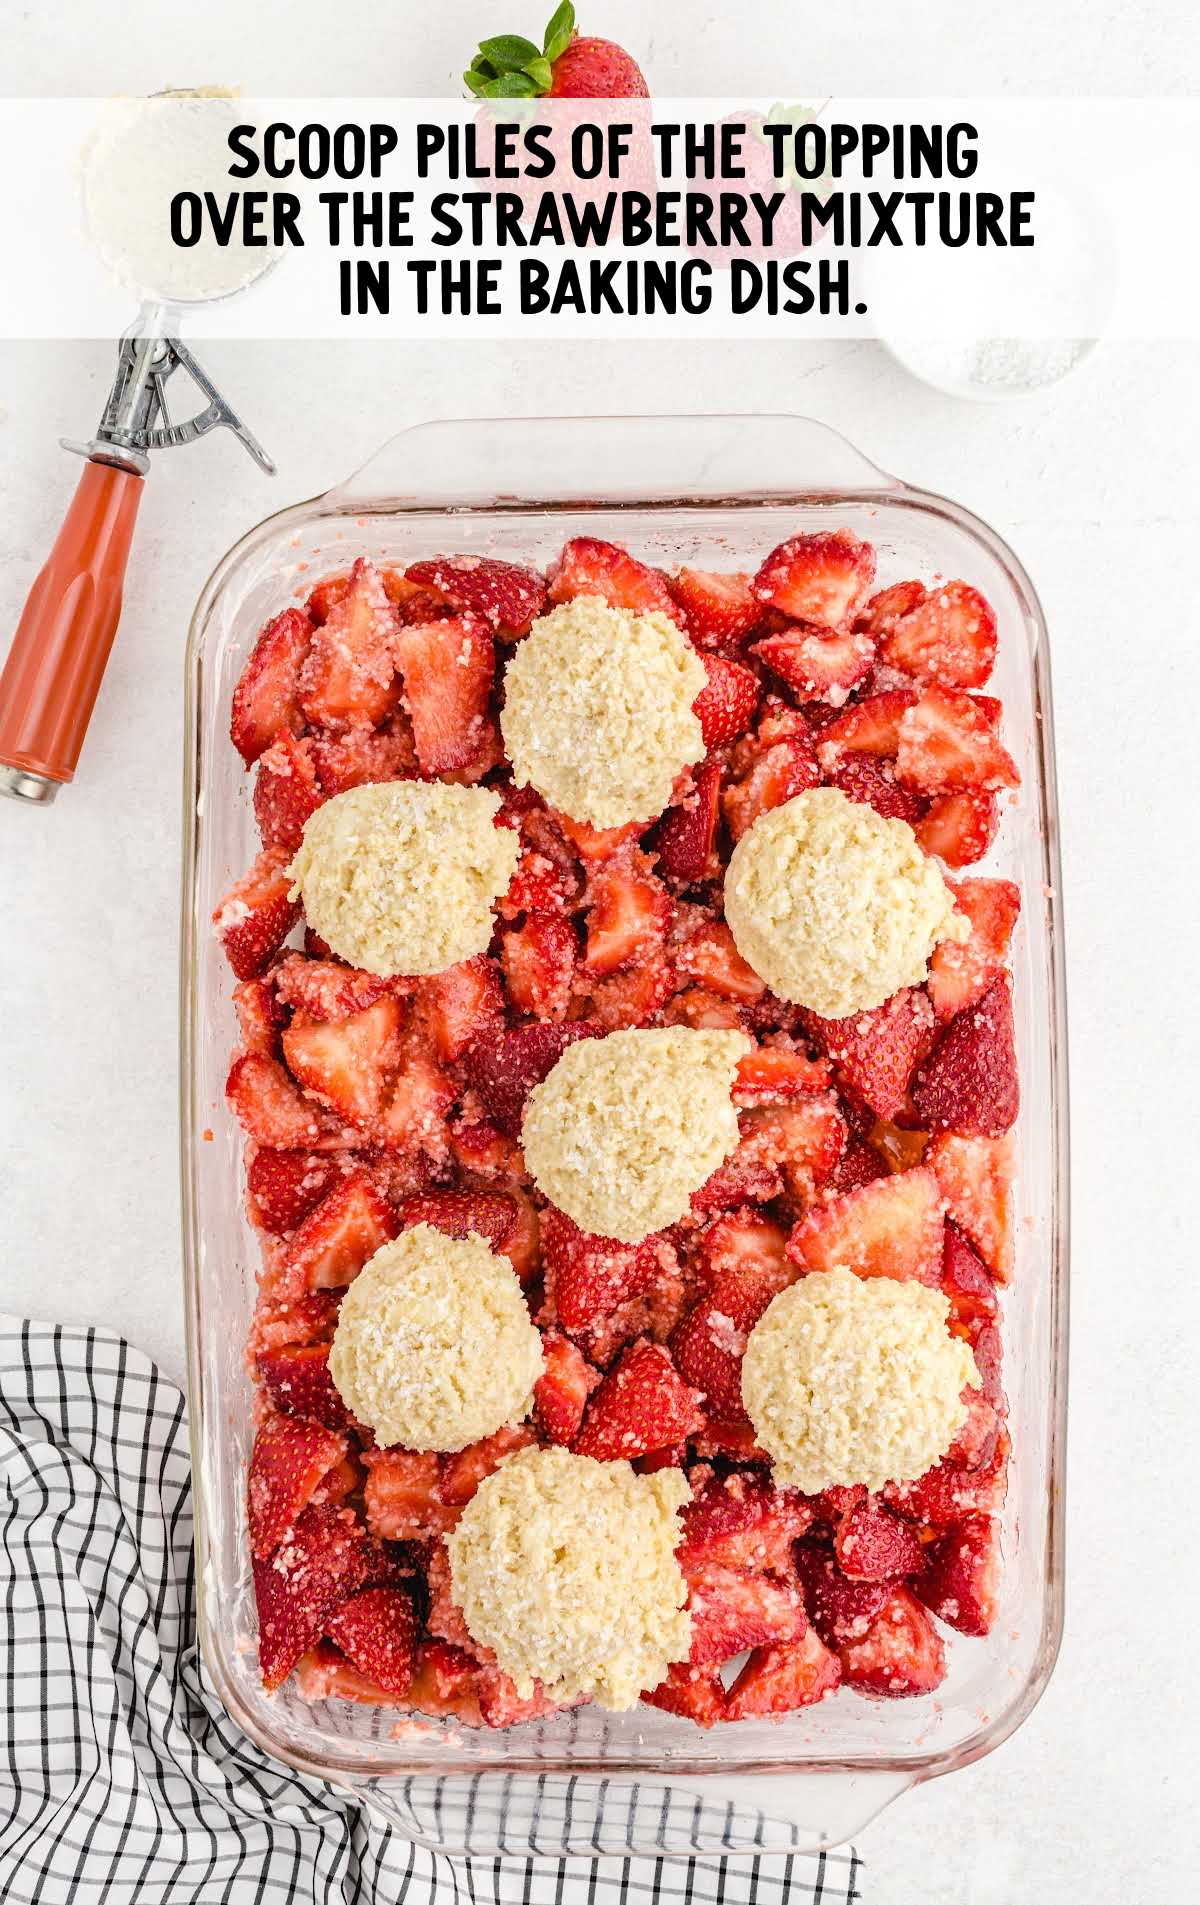 topping placed on top of the strawberry mixture in a baking dish